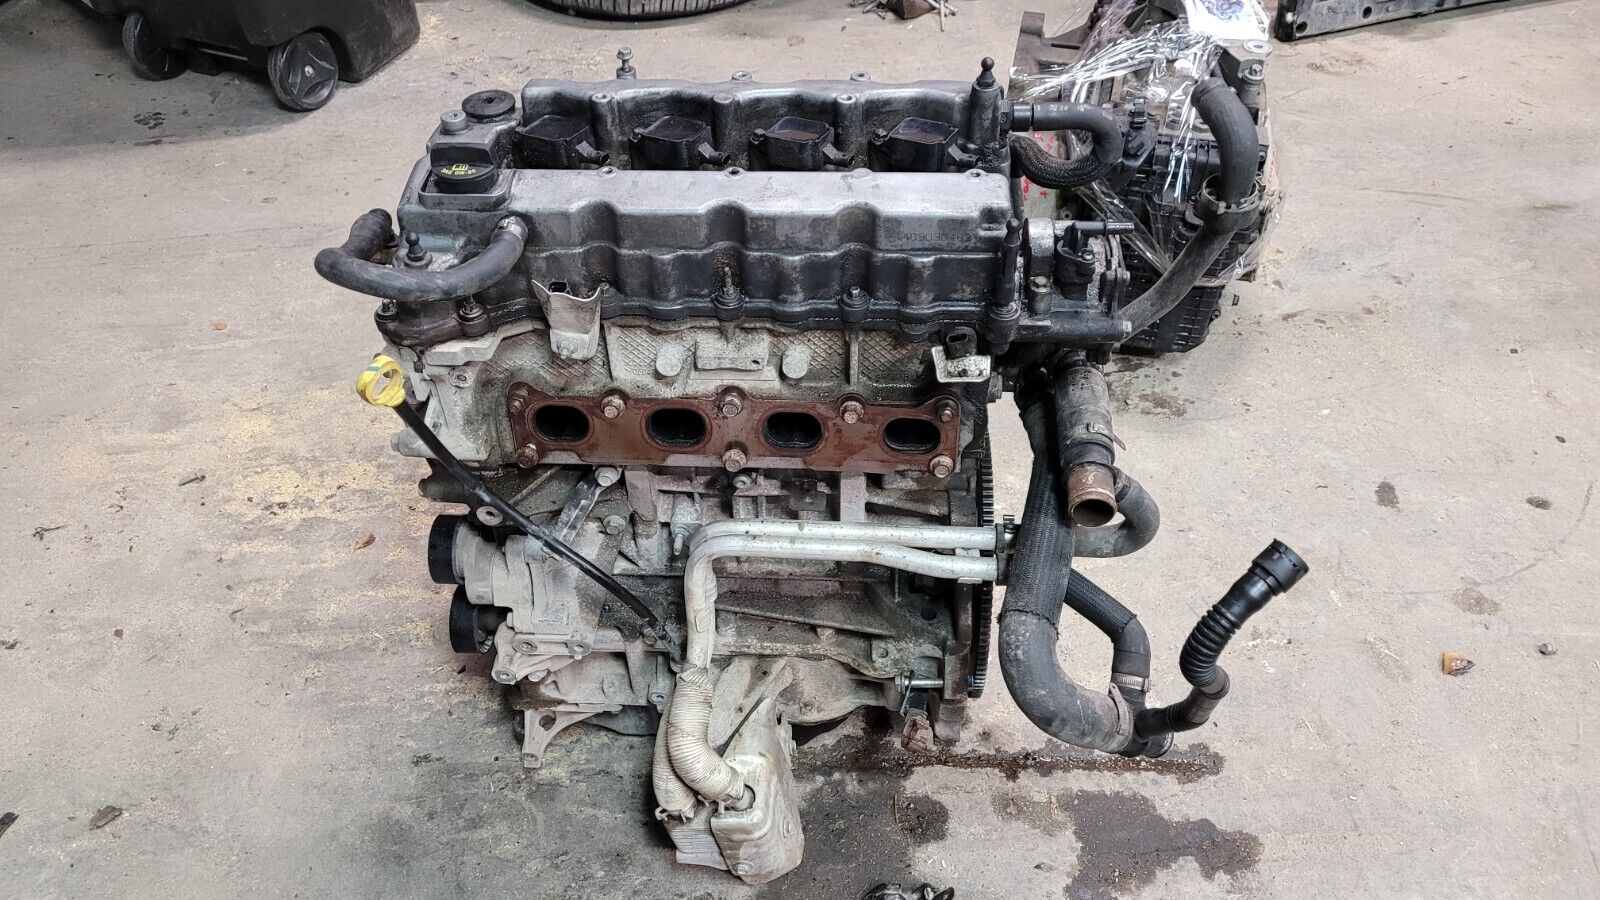 2015-2018 JEEP RENEGADE - ENGINE MOTOR 2.4L - 135,017 MILES - Tested & Runs Well